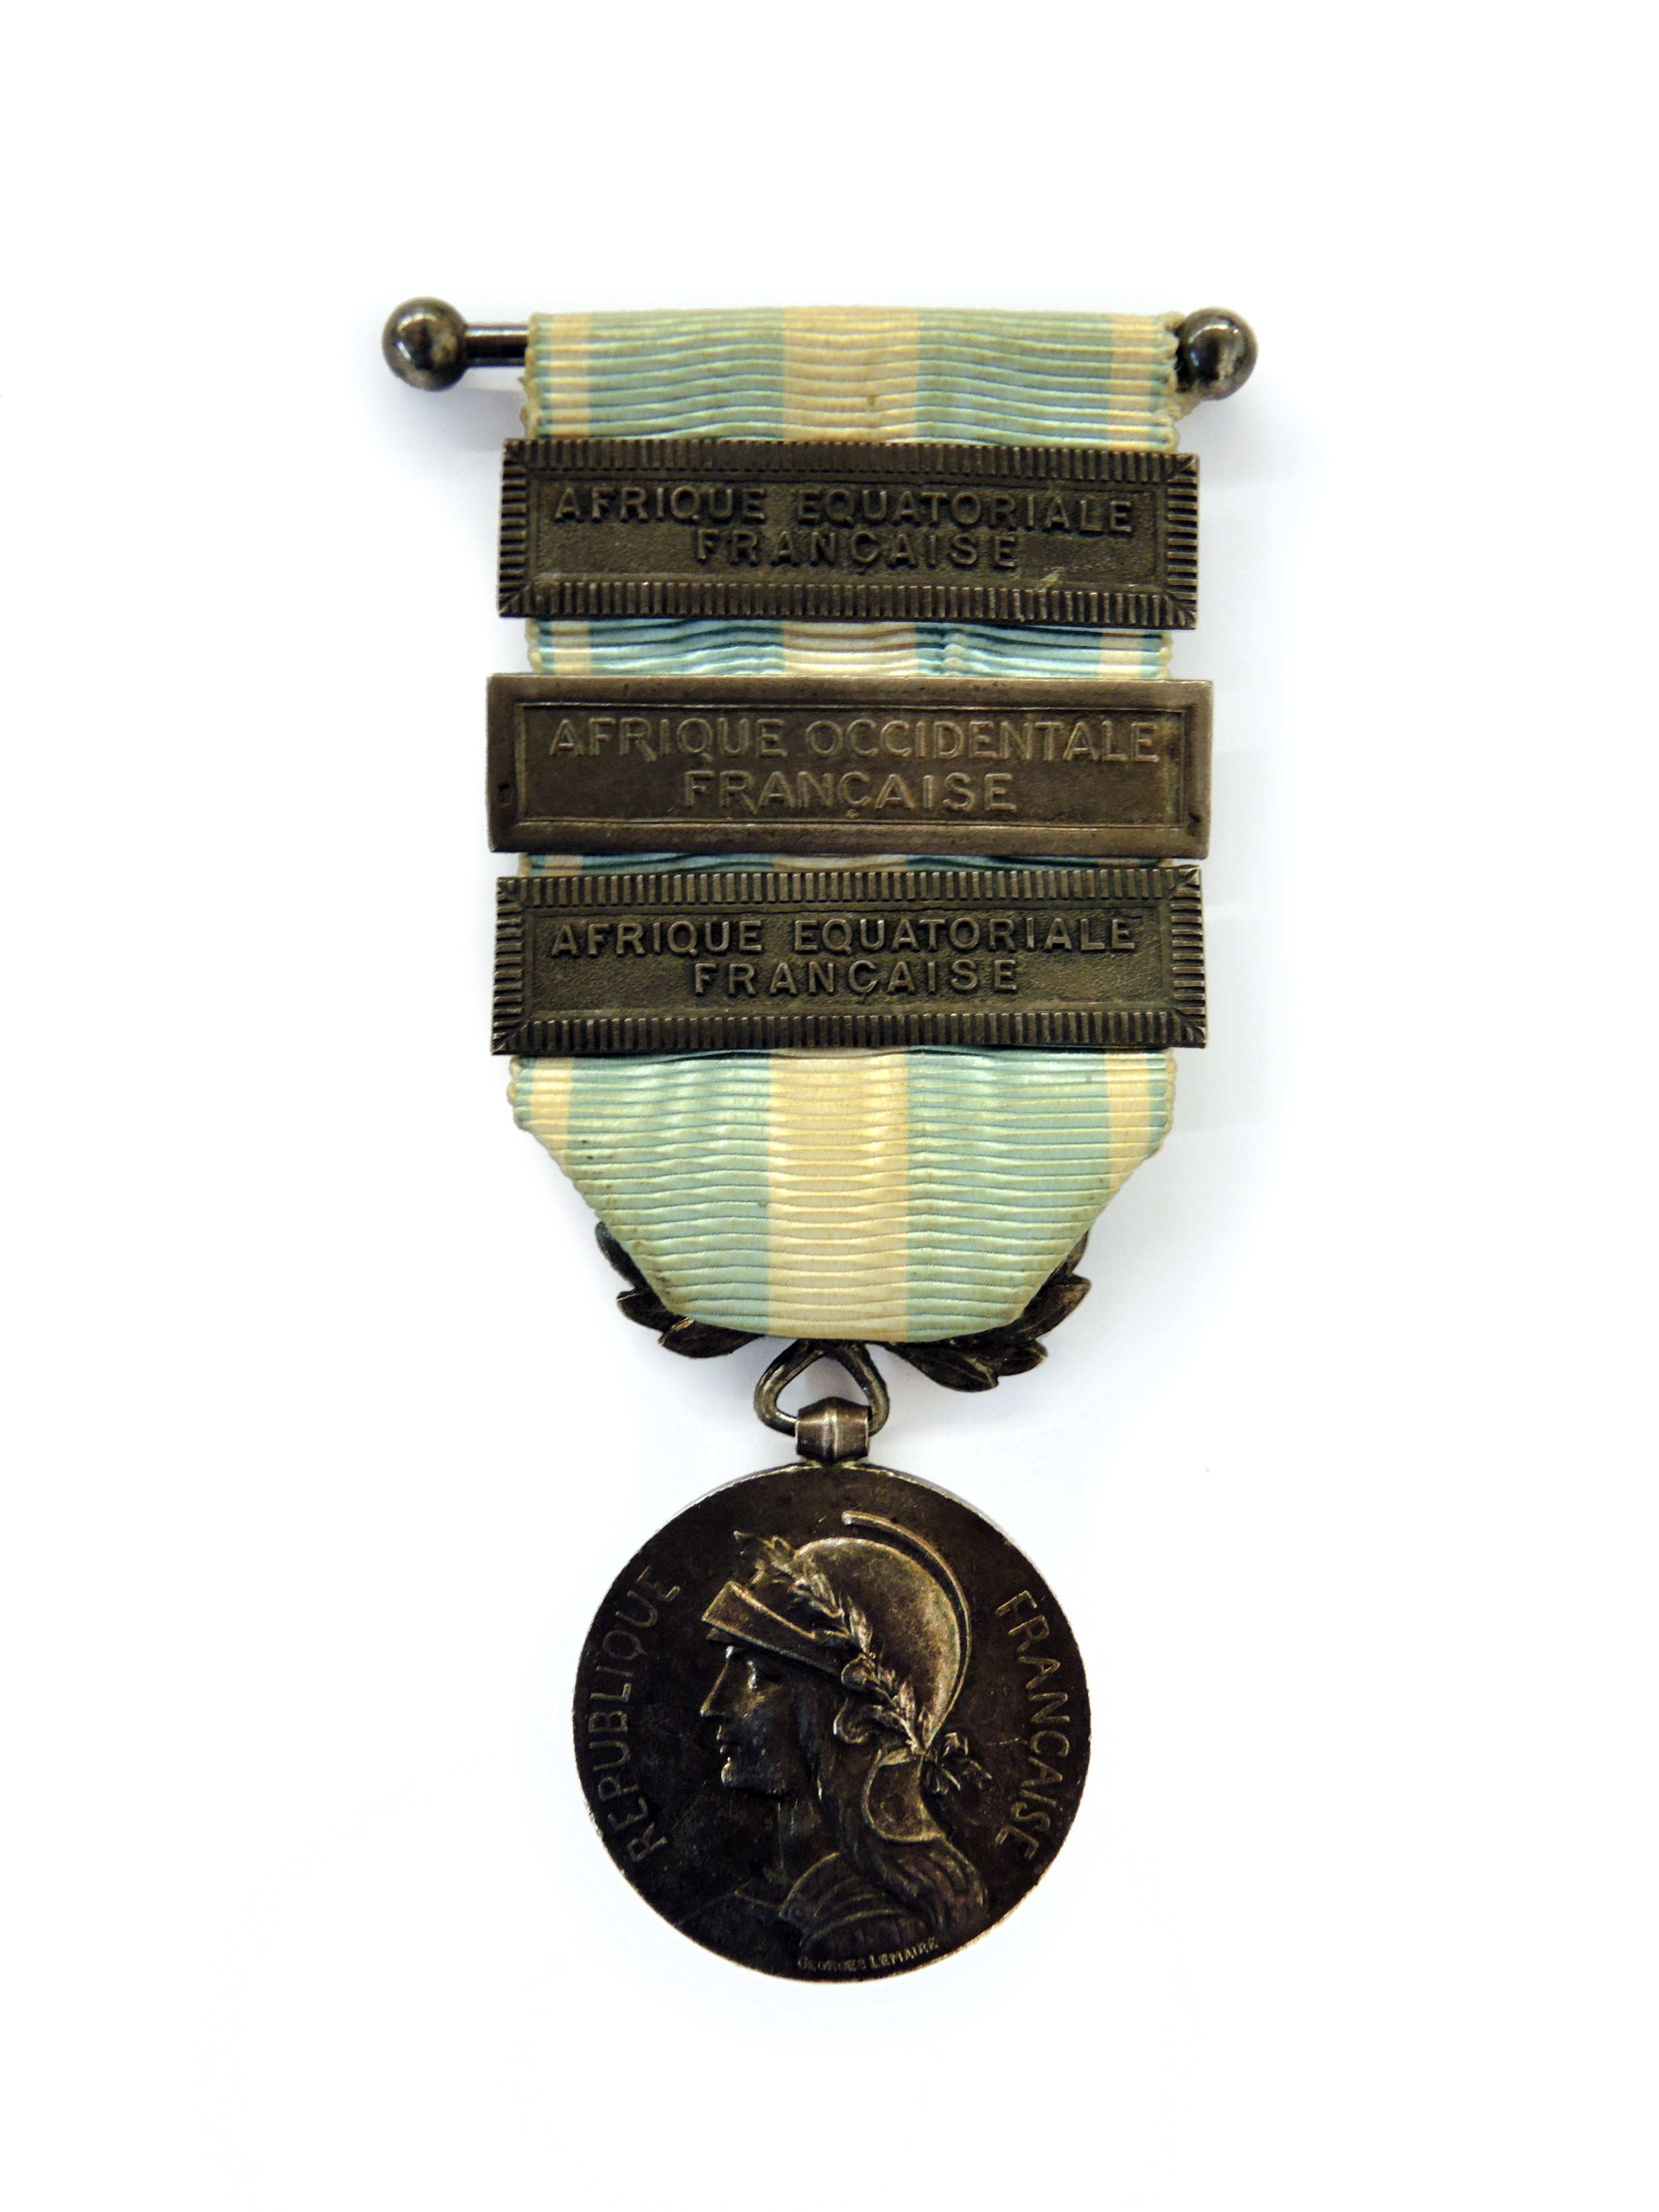 Médaille coloniale avec trois agrafes (AEF, AEF, AOF)